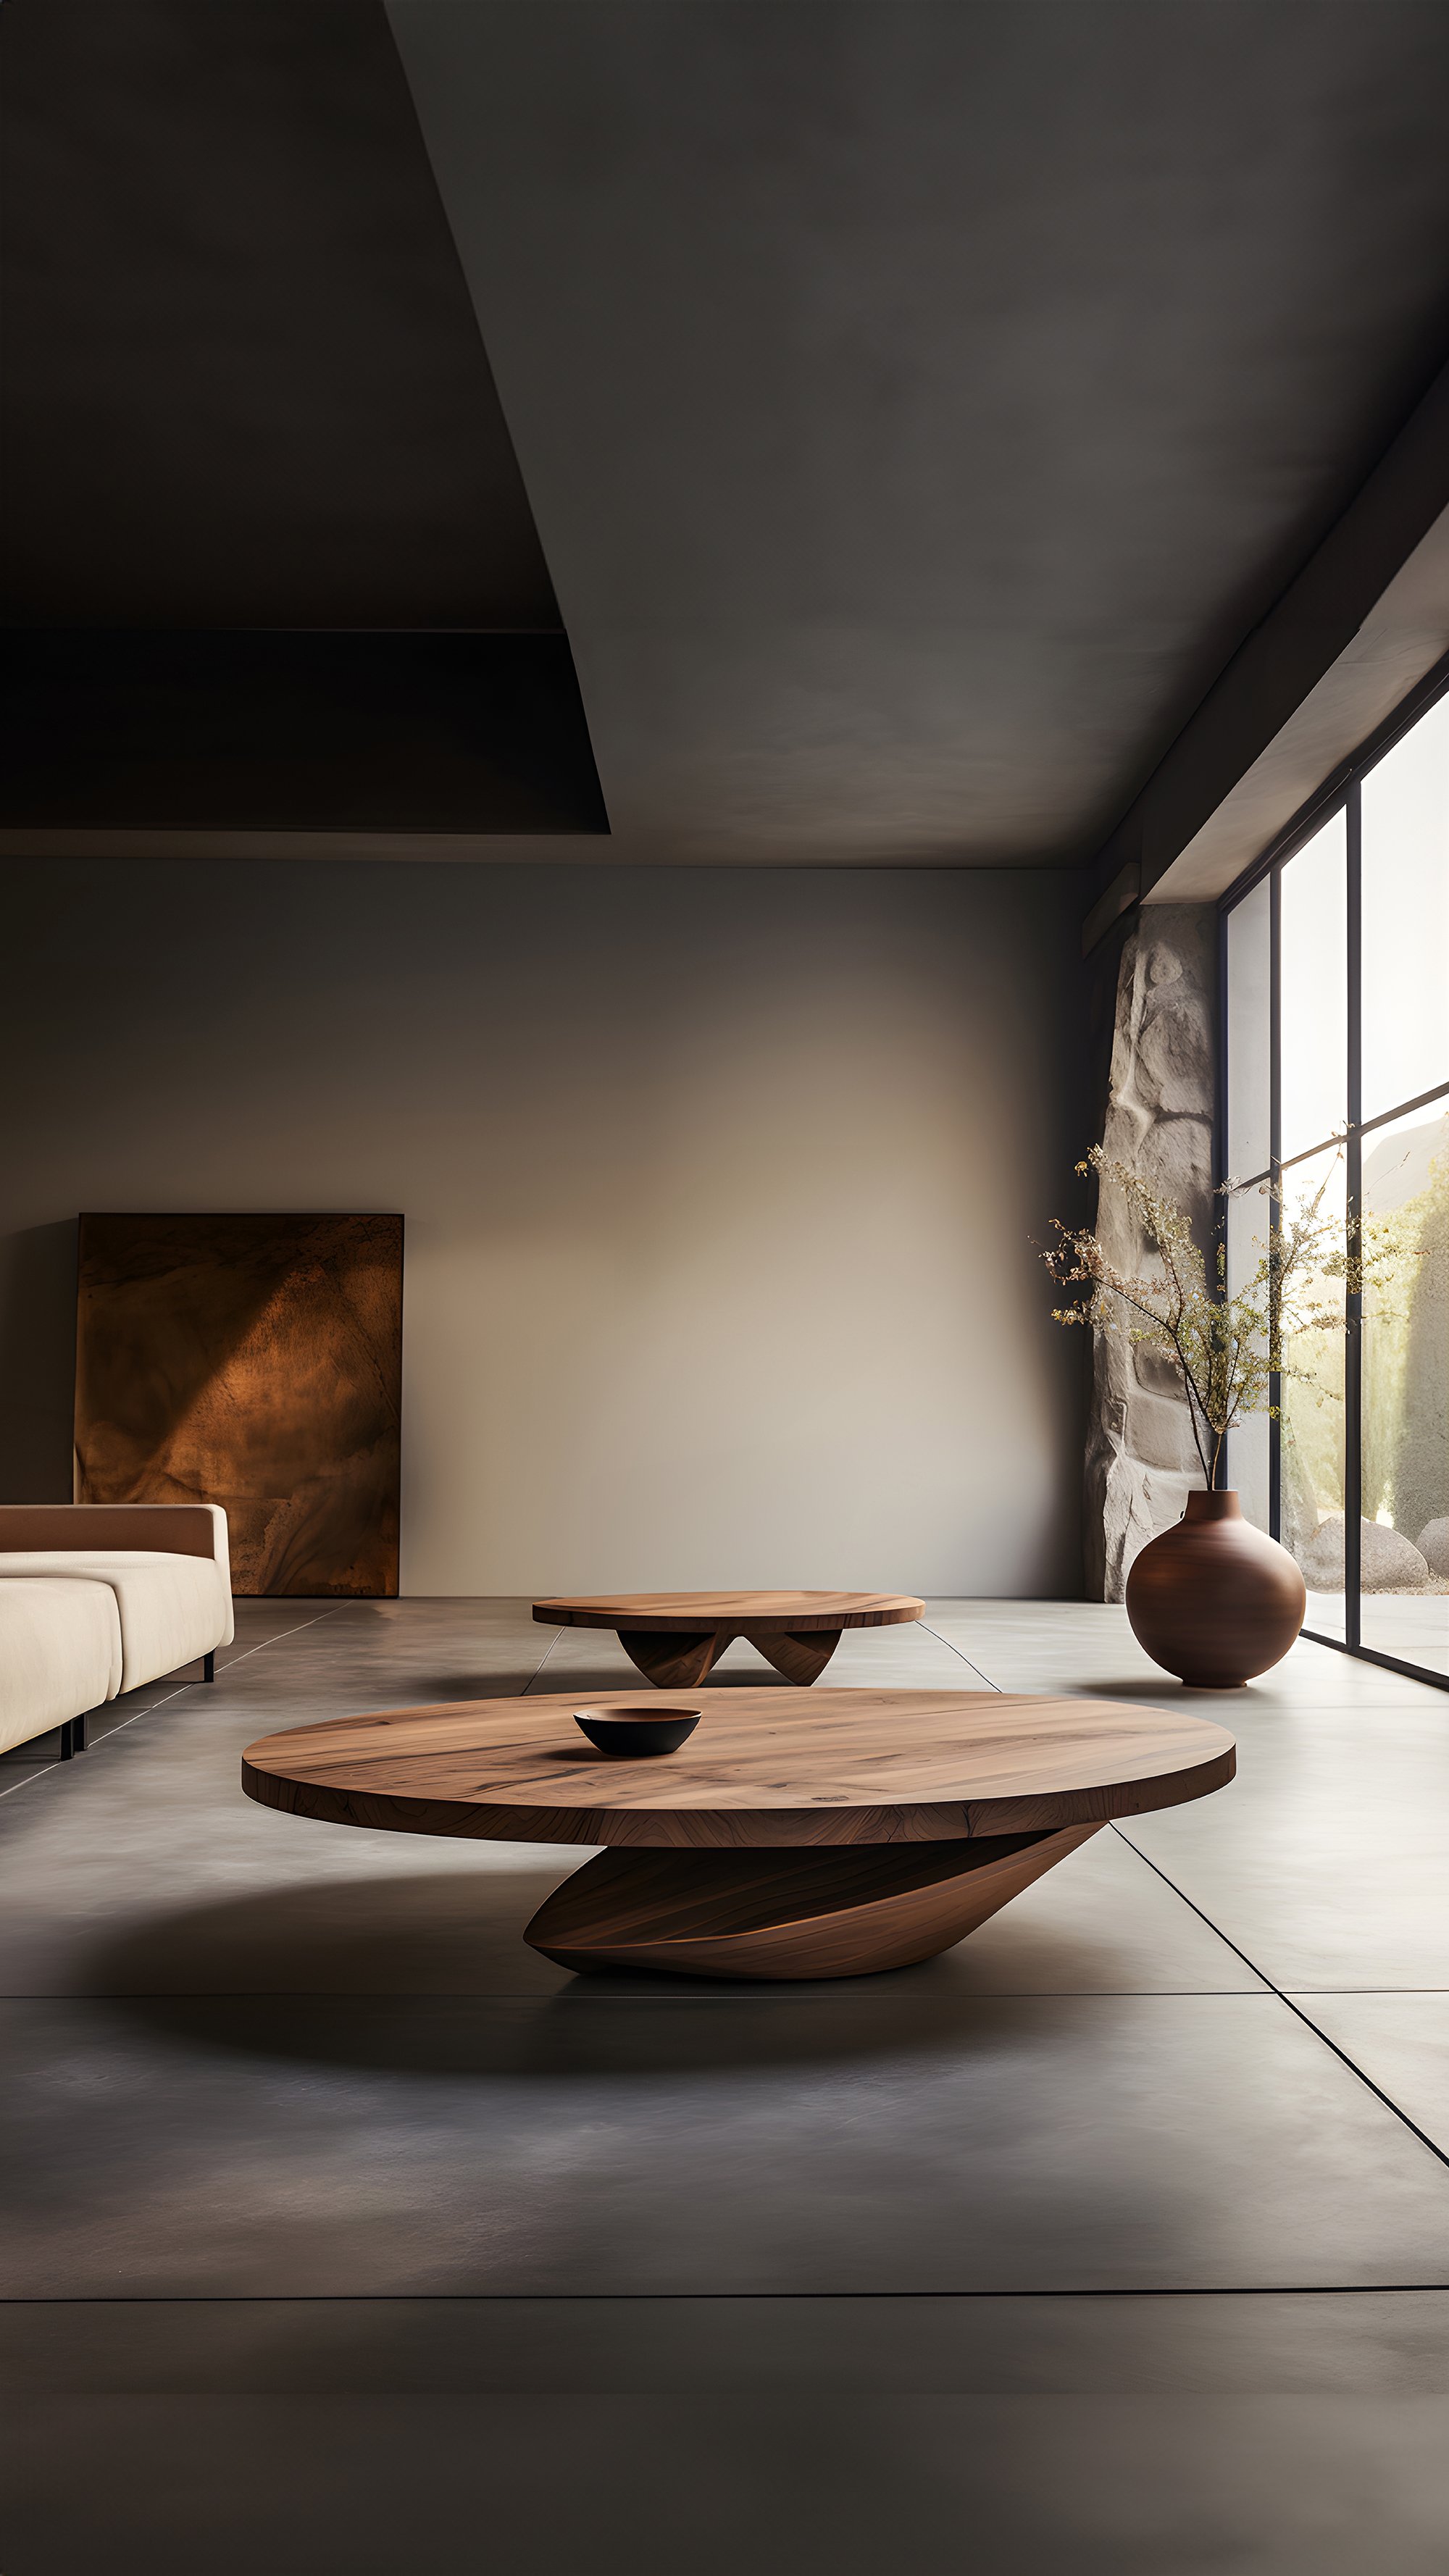 Sculptural Coffee Table Made of Solid Wood, Center Table Solace S44 by Joel Escalona — 7.jpg